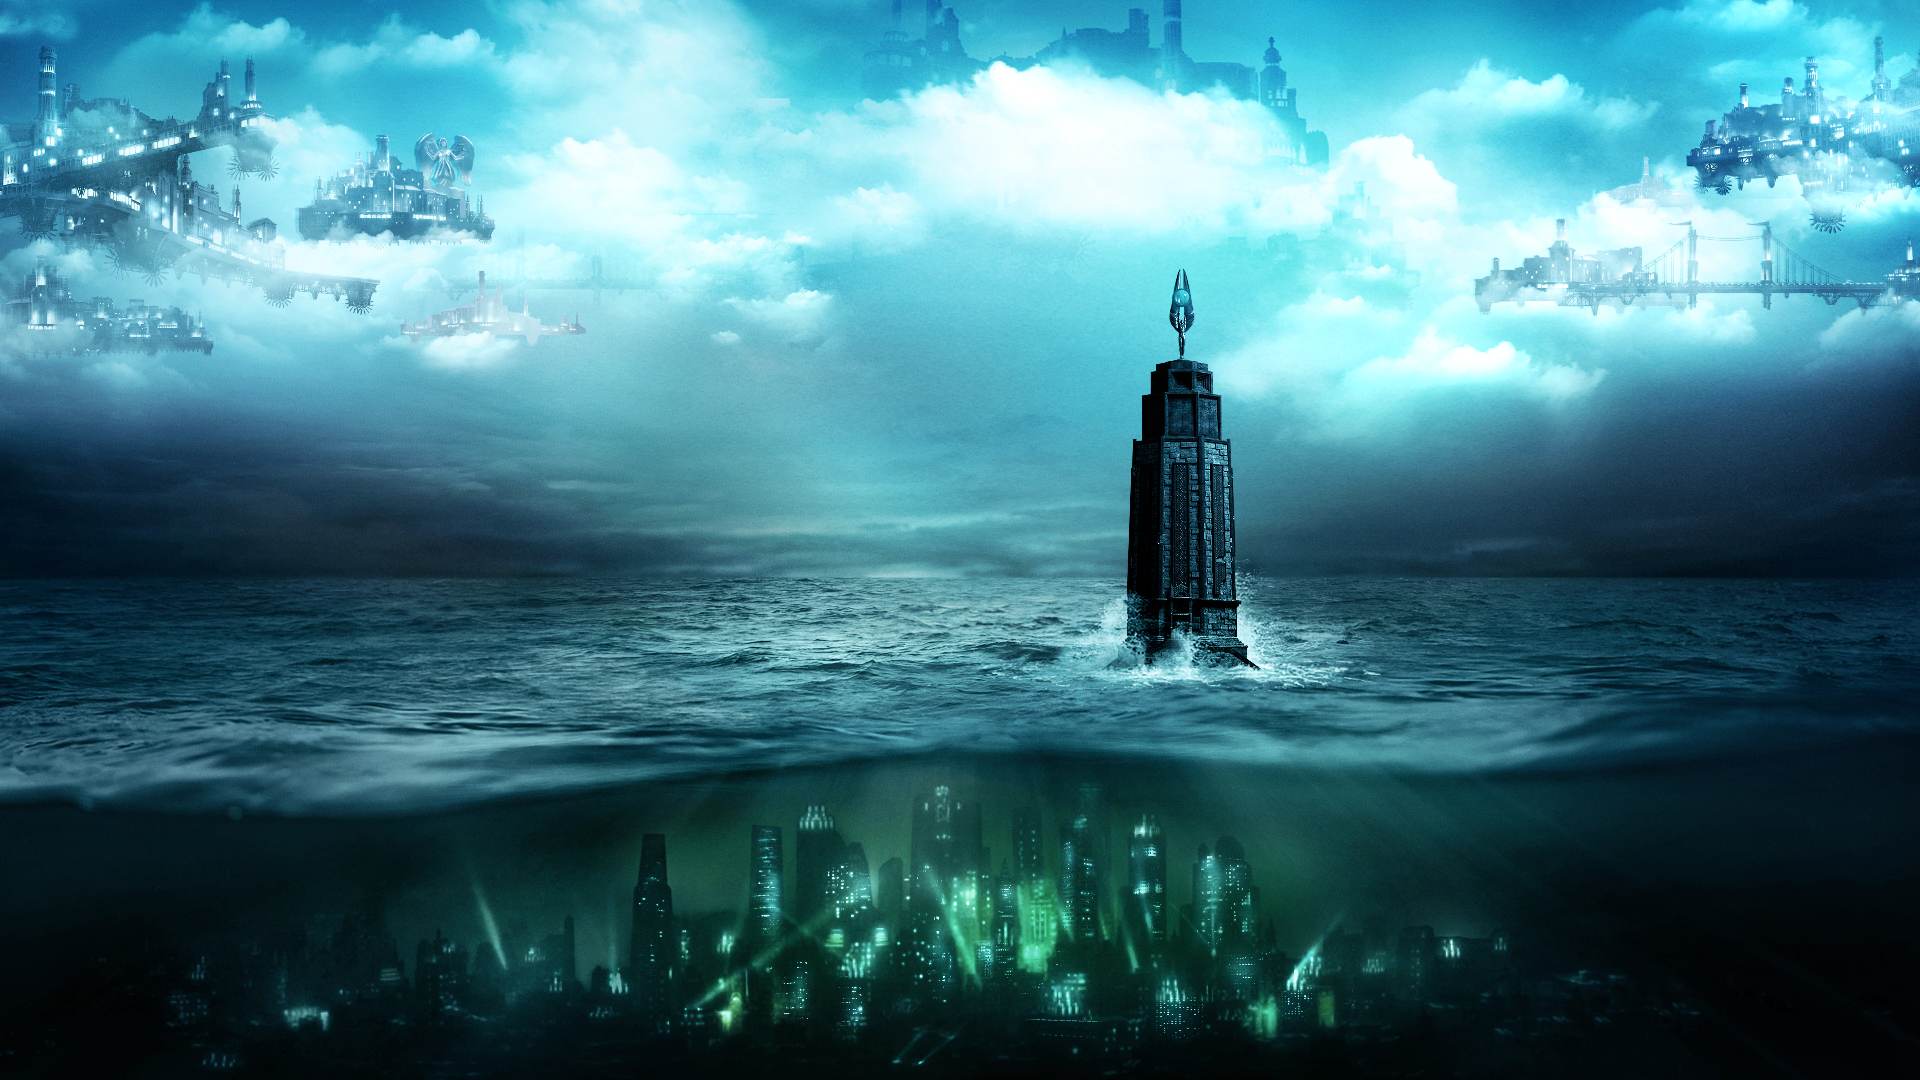 Bioshock Isolation: A lighthouse can be seen with Colombia and Rapture above and below it.